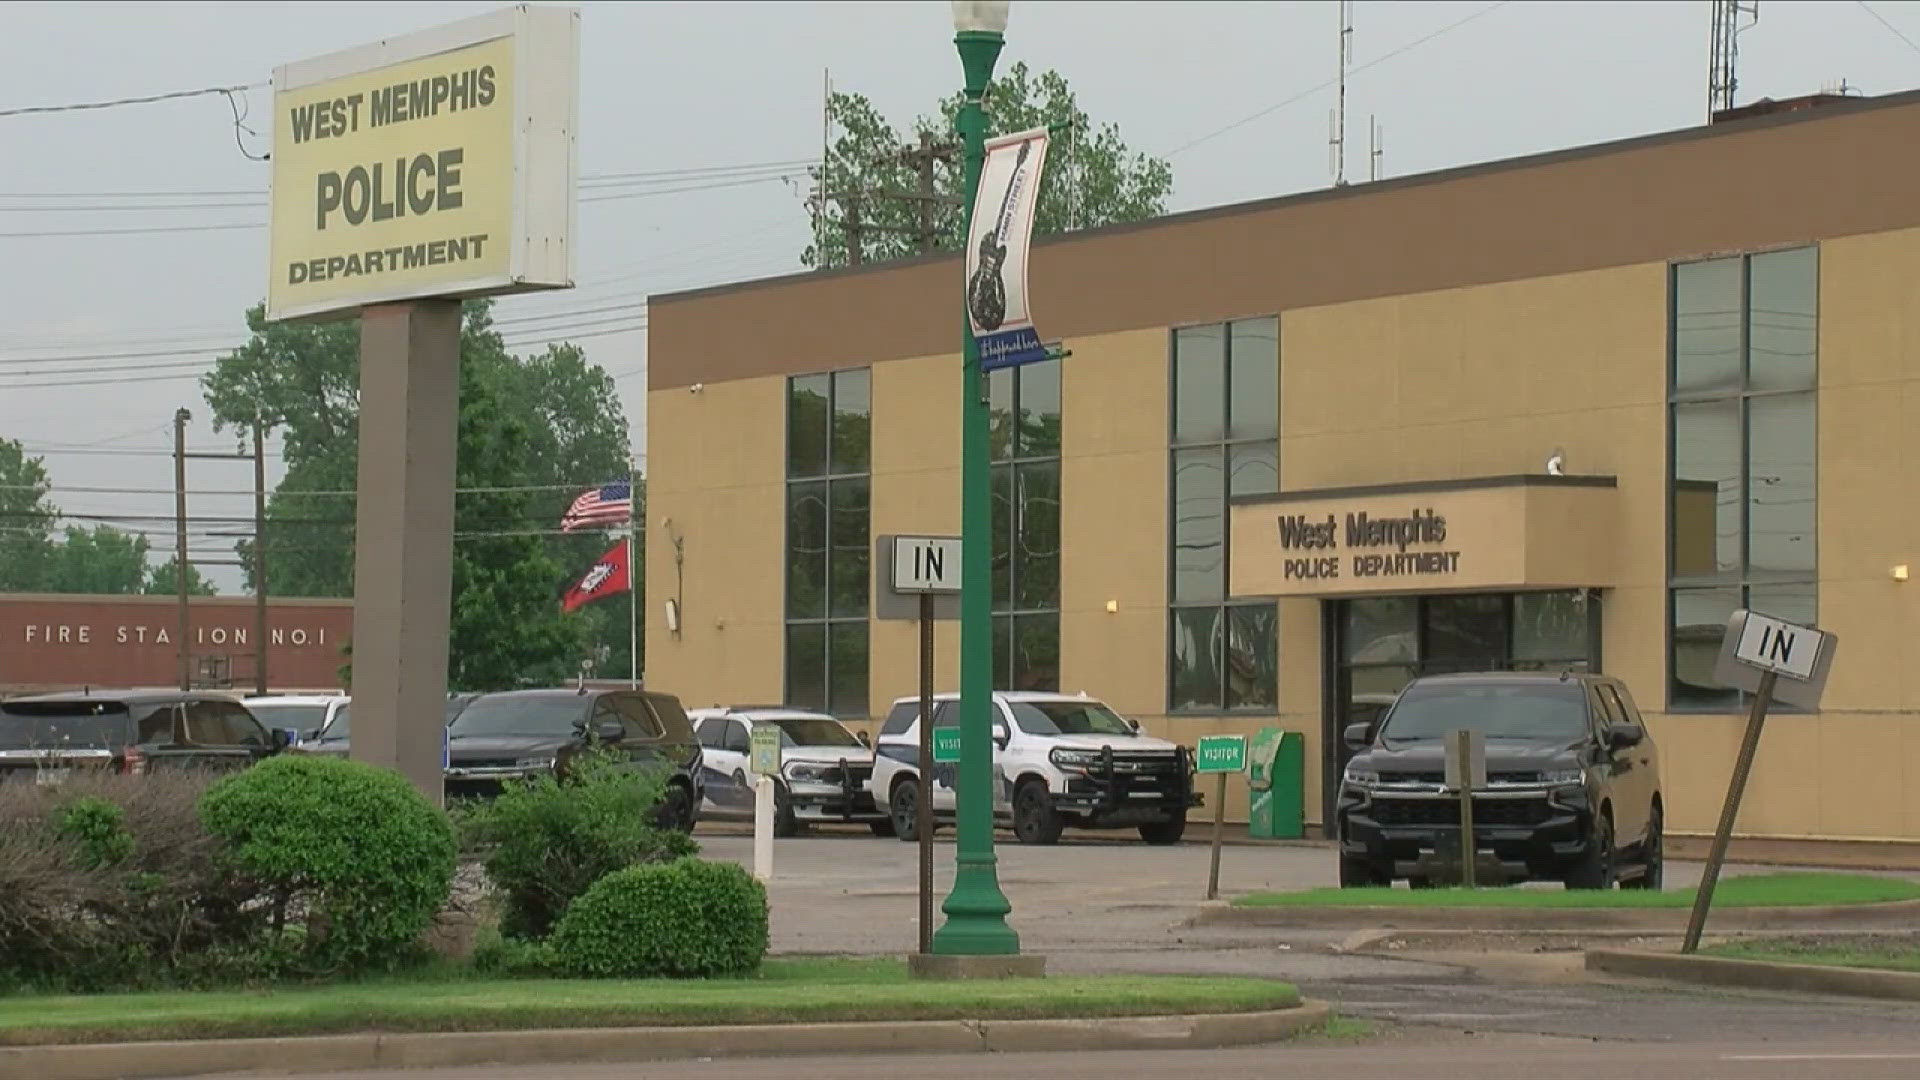 During a news conference Friday, Mayor Marco McLendon and West Memphis Police said they are focusing on finding solutions to increase the peace in the city.